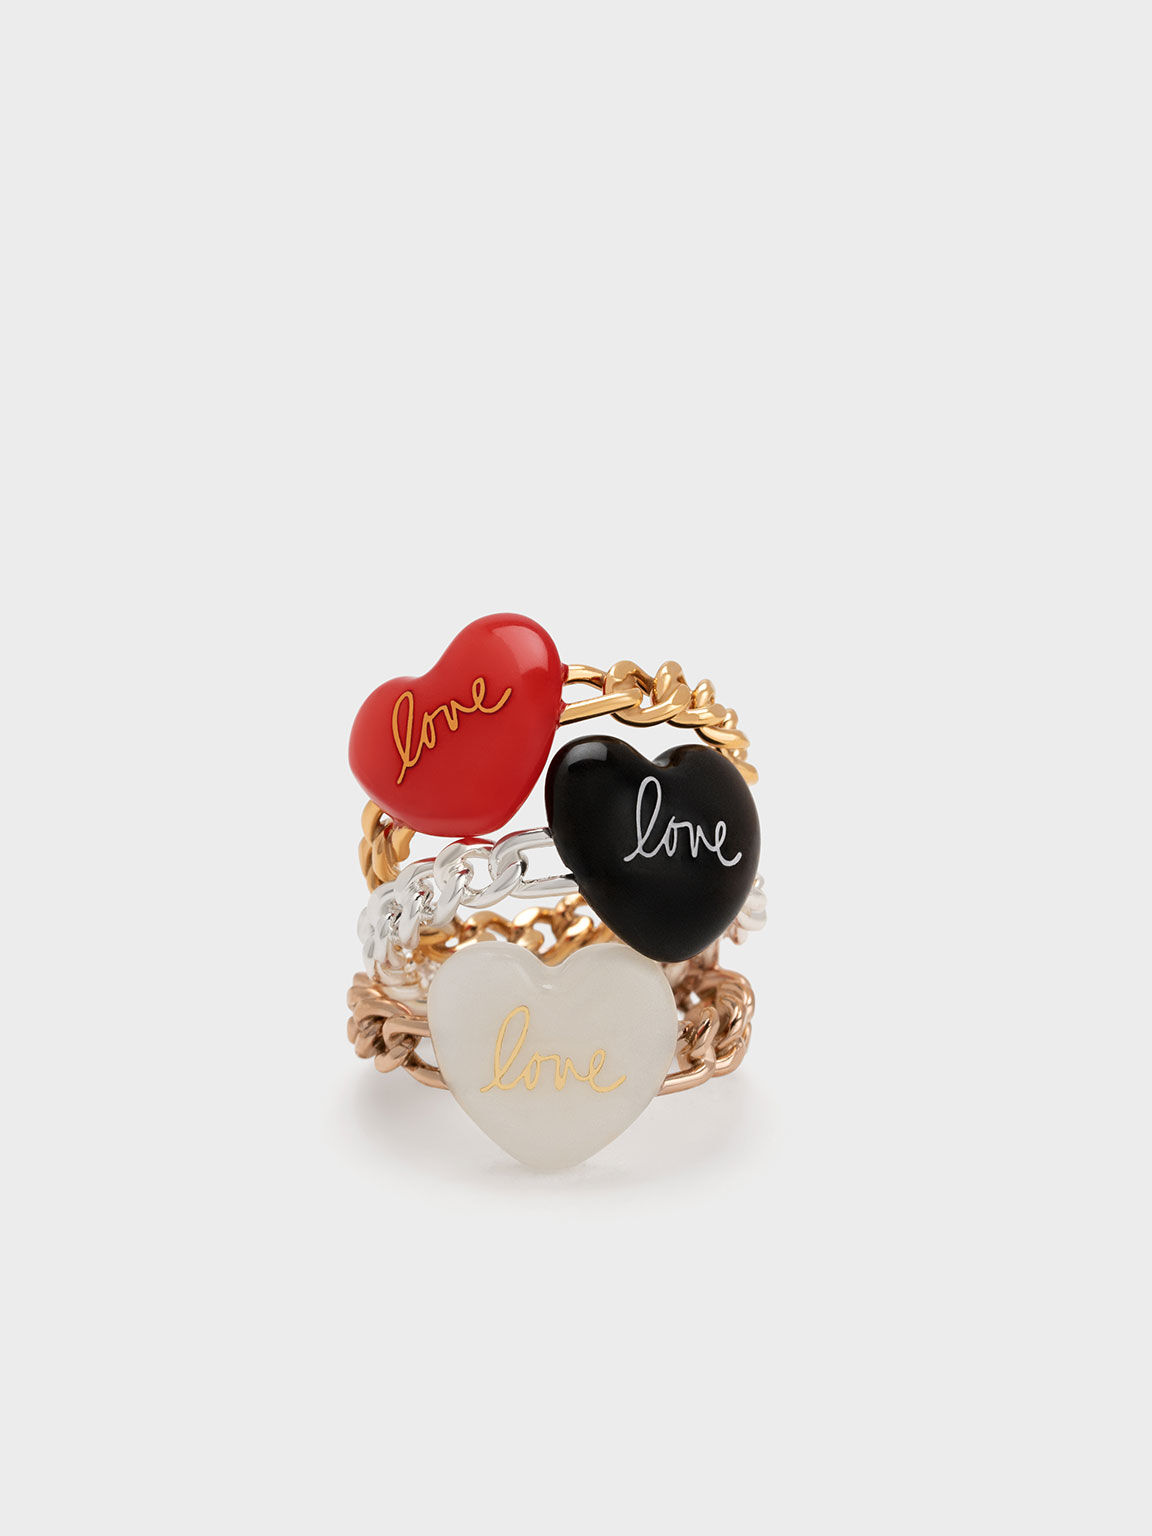 "Love" Heart Braided Ring, Red, hi-res